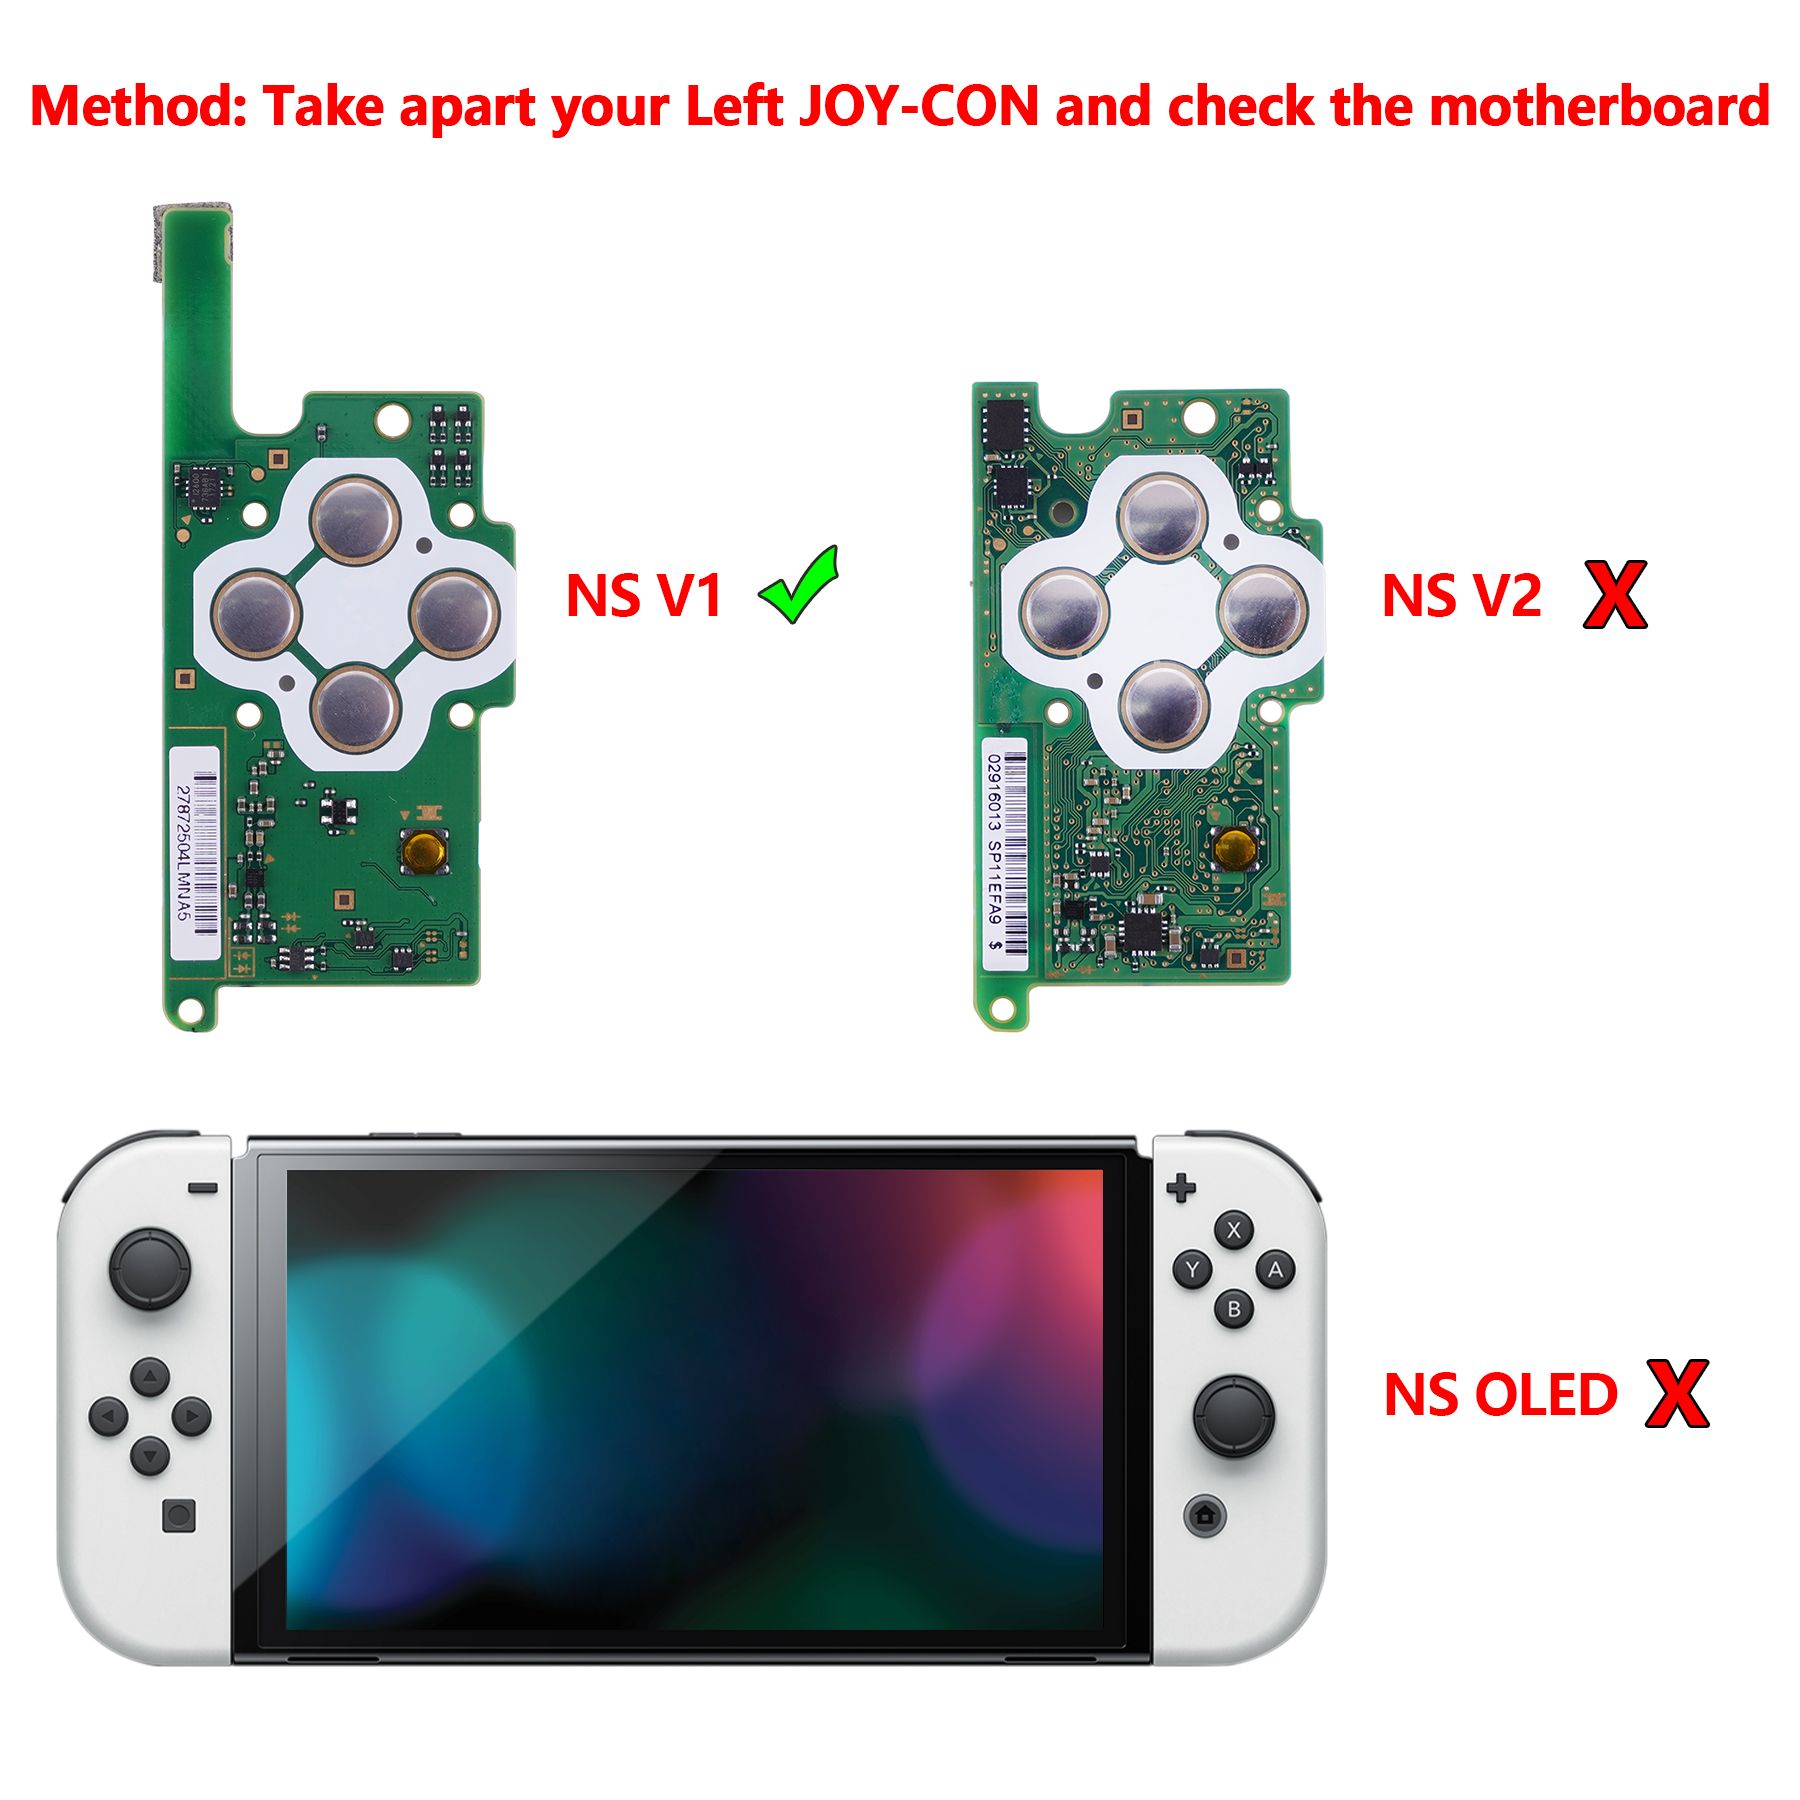 Joy-Con LED Button Kit for Nintendo Switch - Standard Clear | Hand